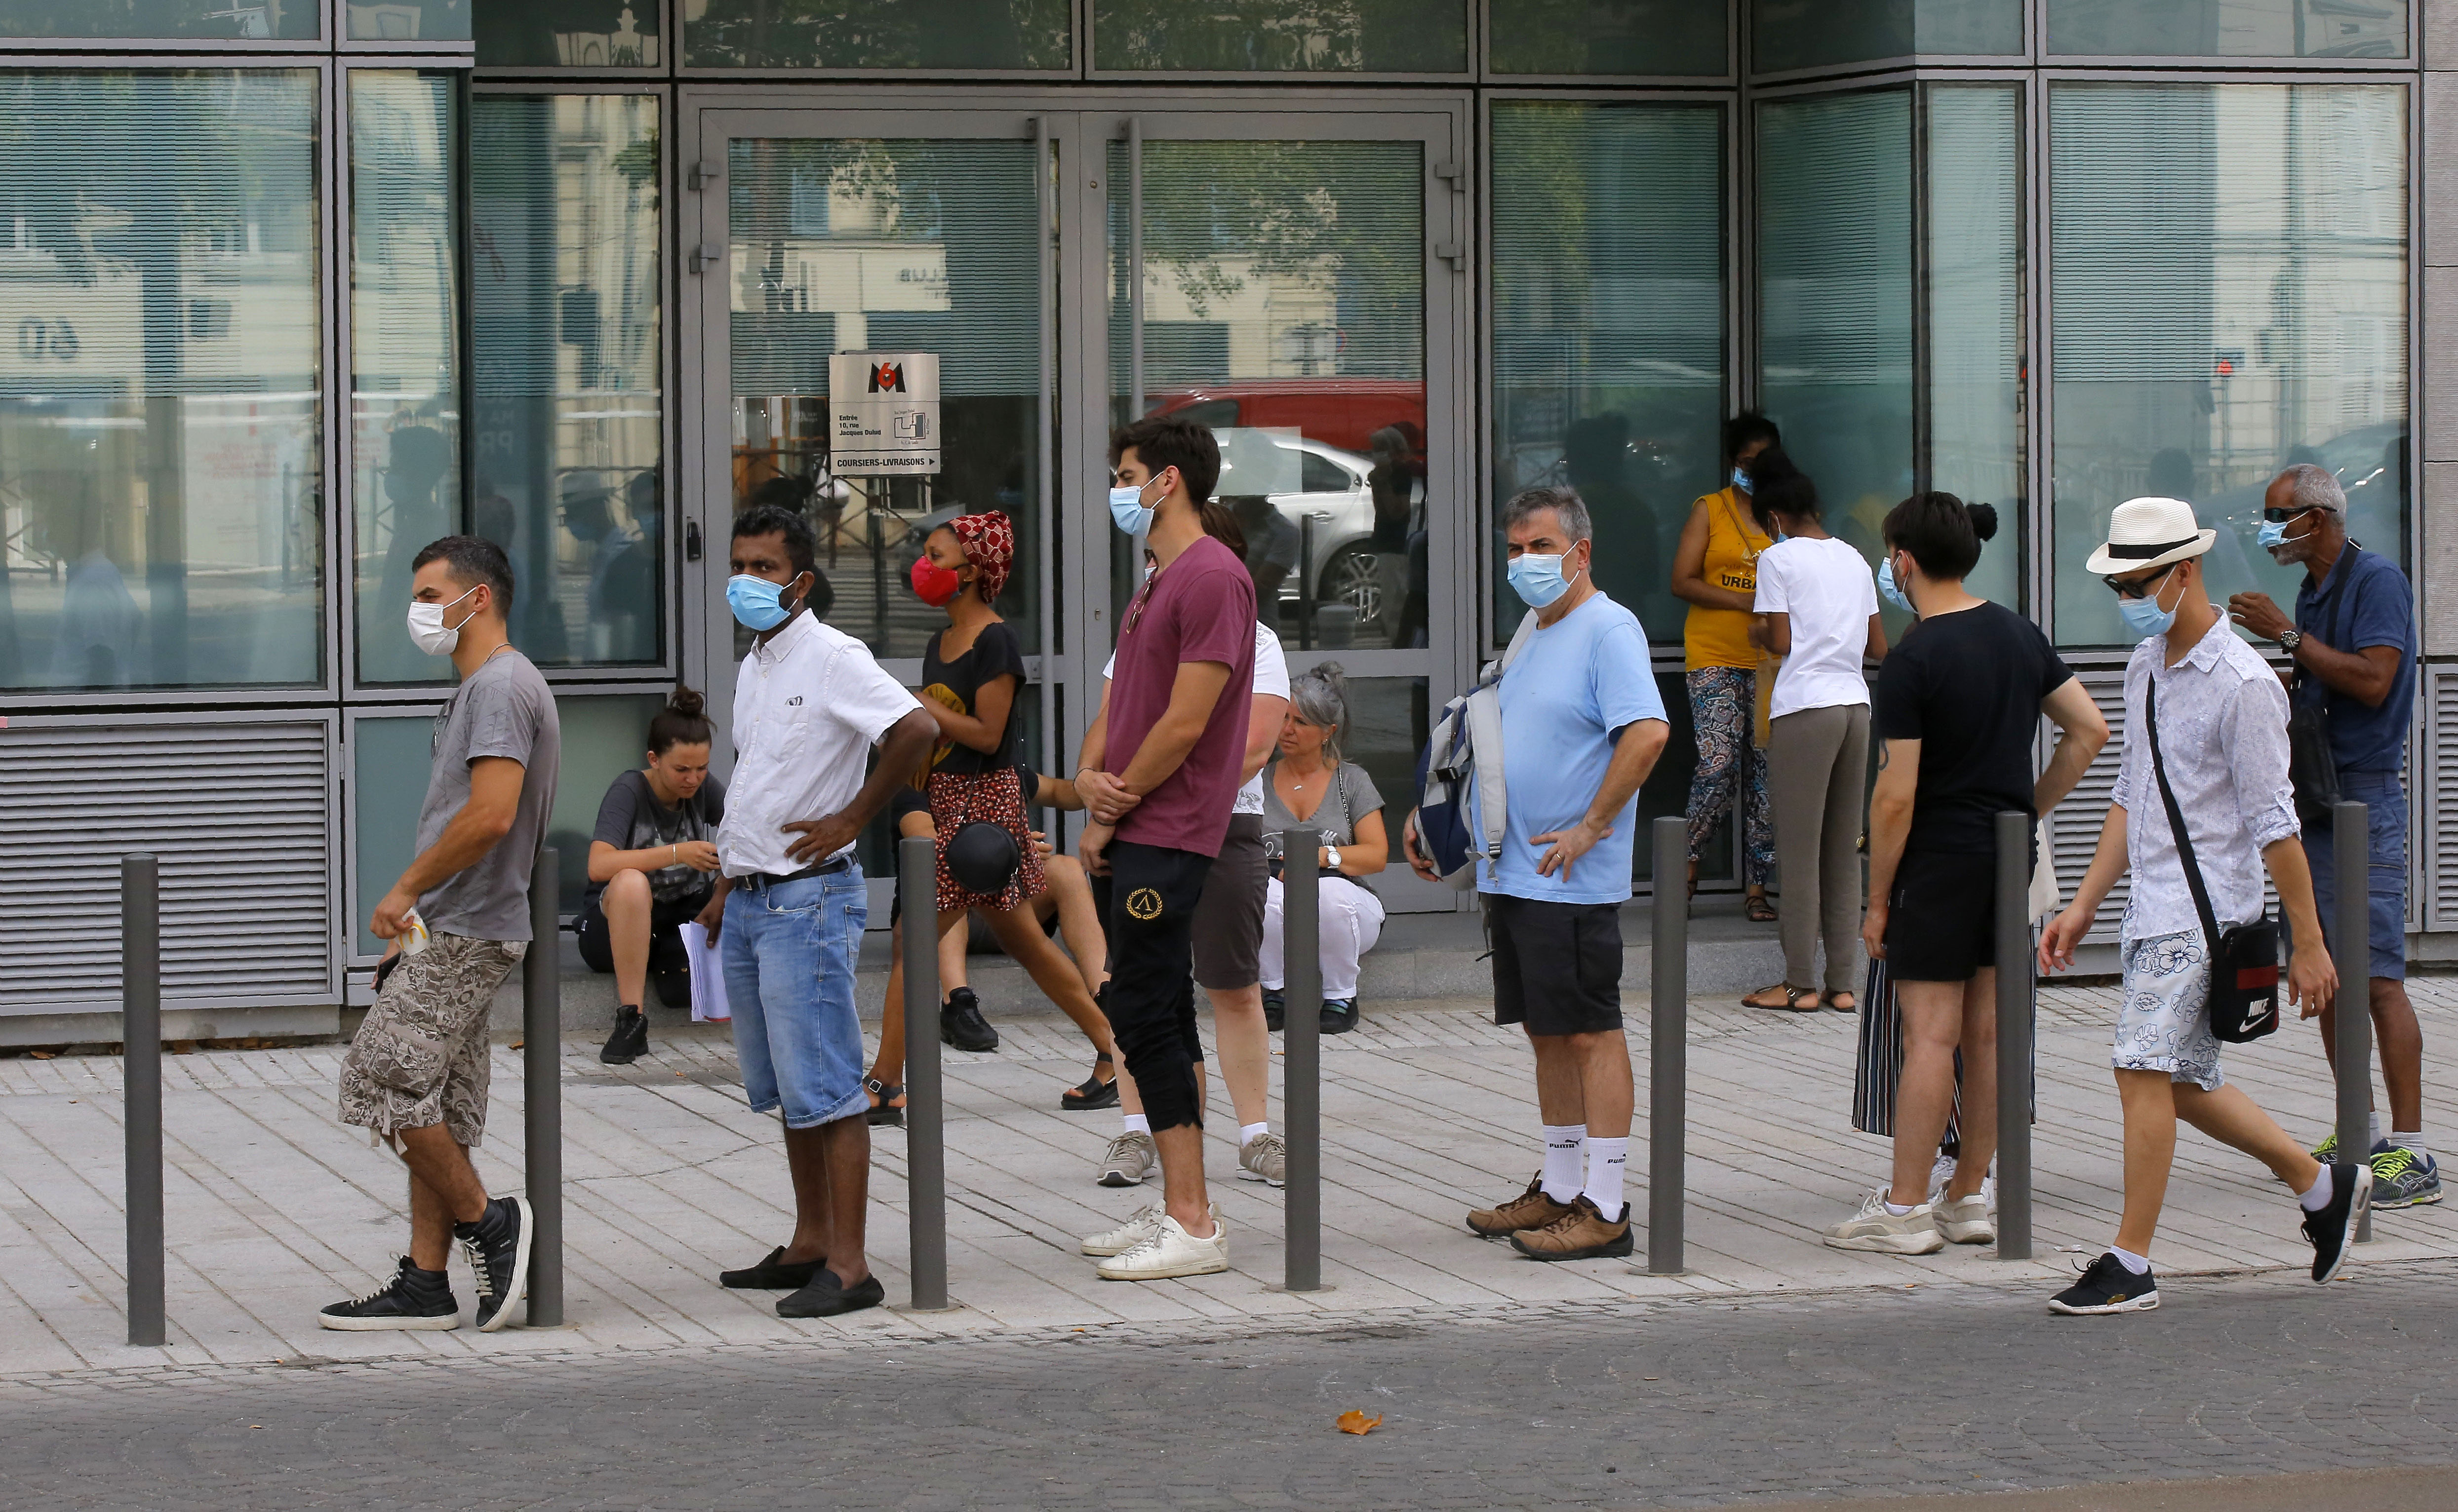 People in Paris wait in line outside a laboratory to get tested for Covid-19 on August 8.